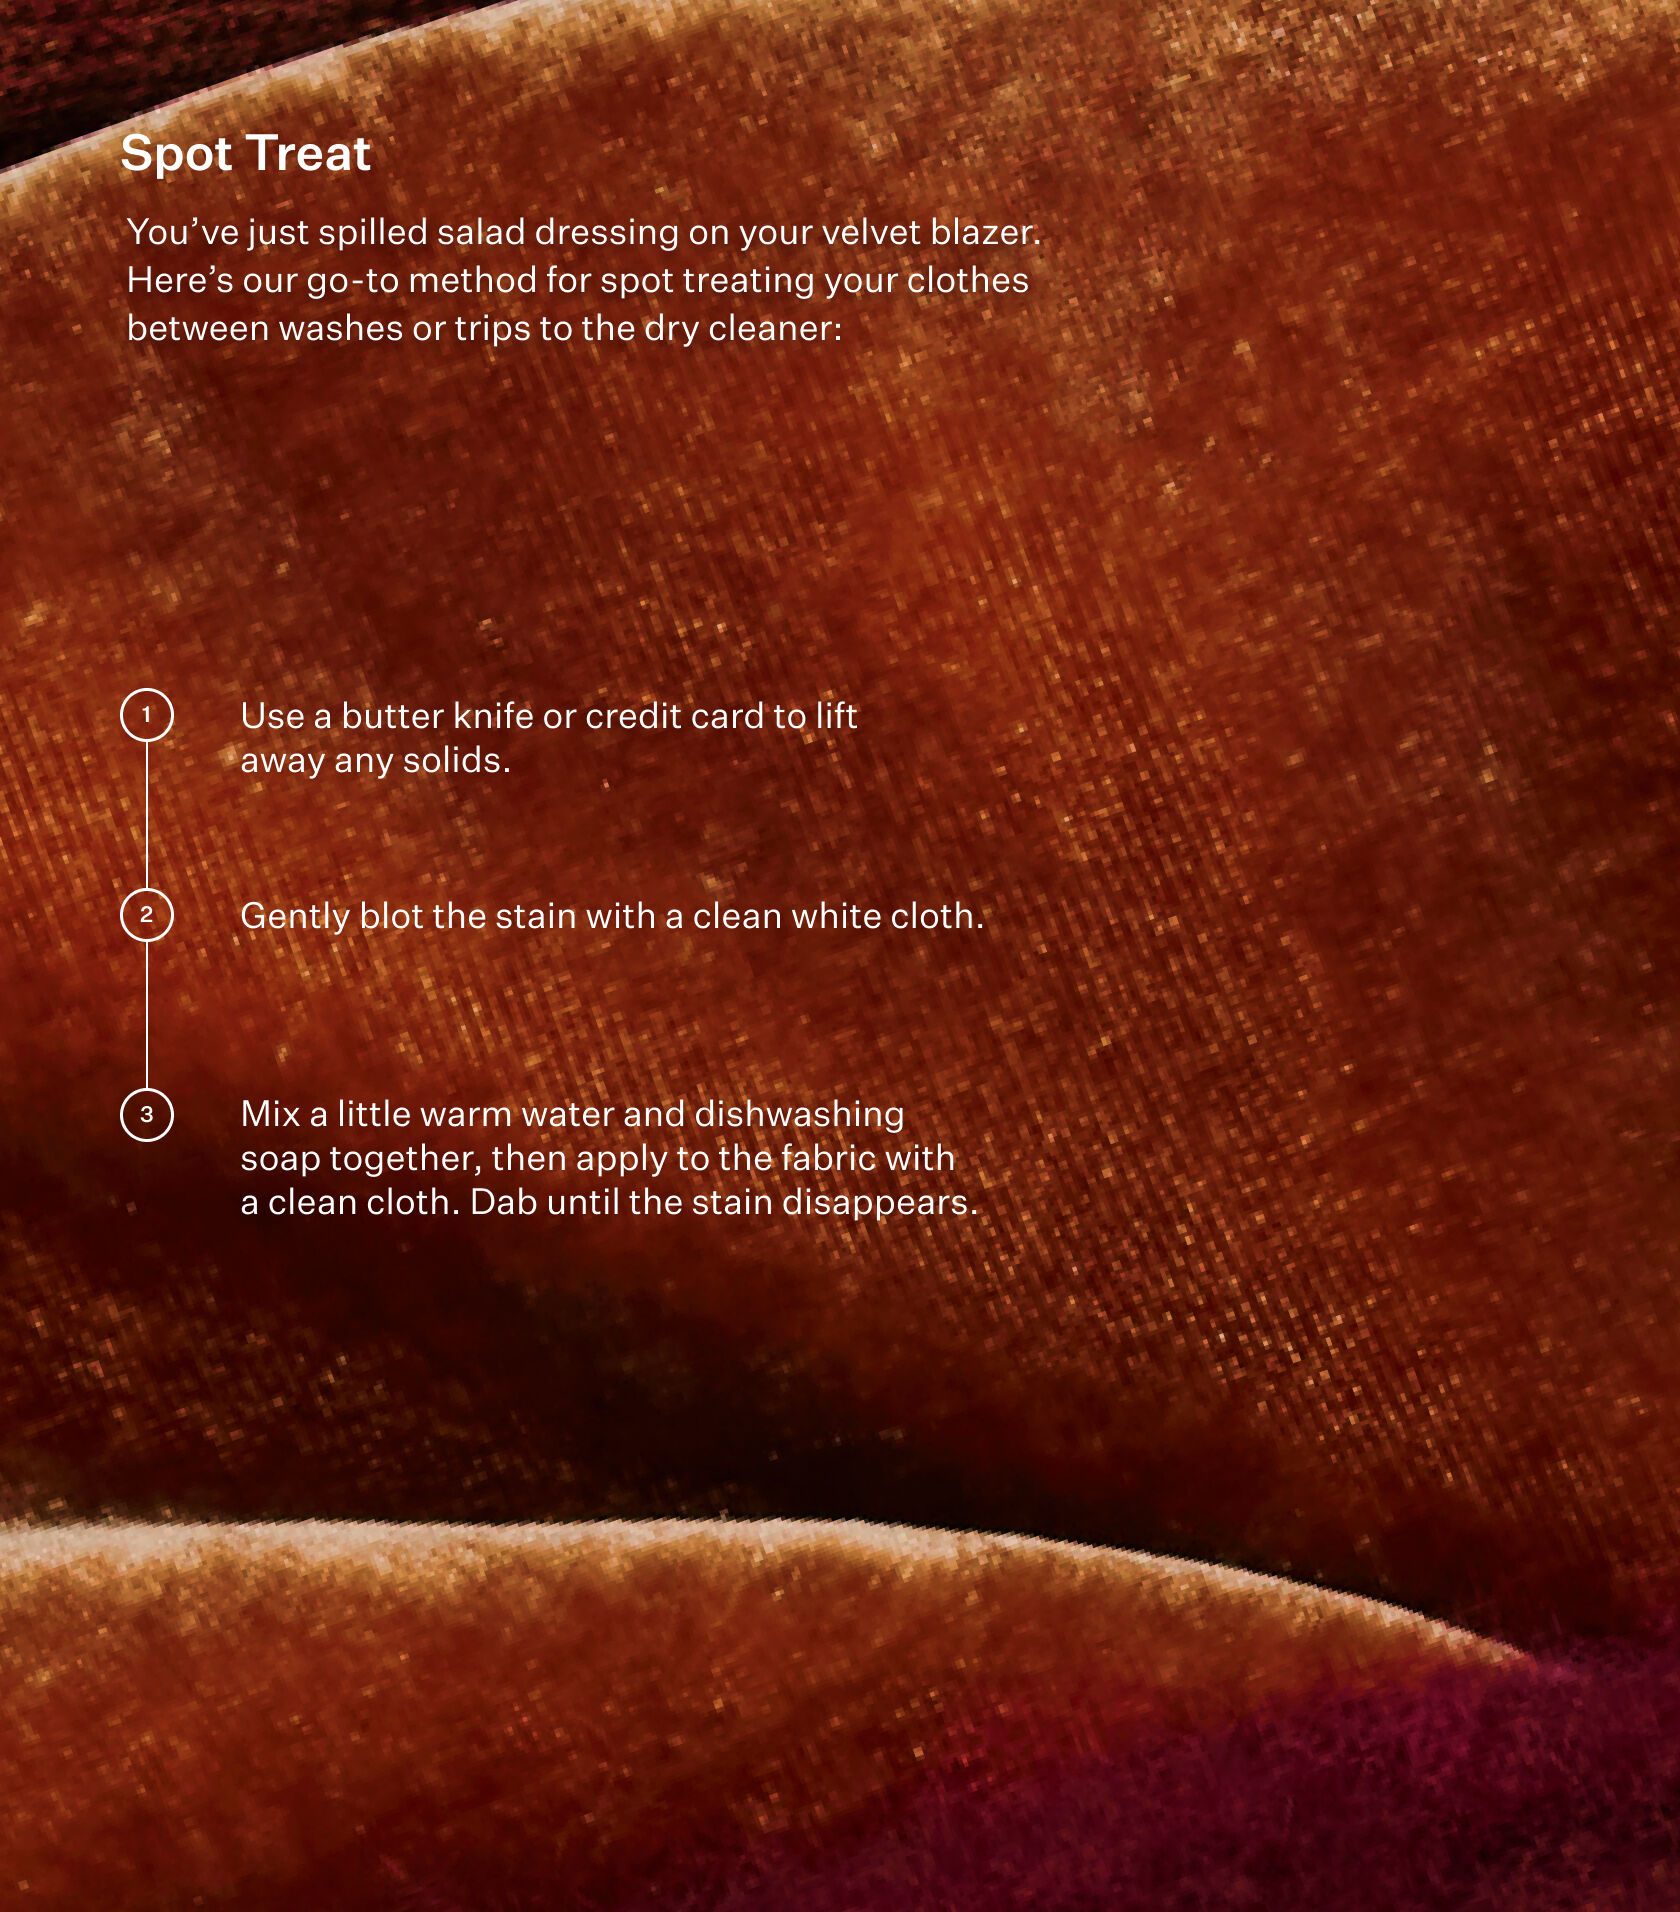 Infographic on spot treating velvet fabric with stains.